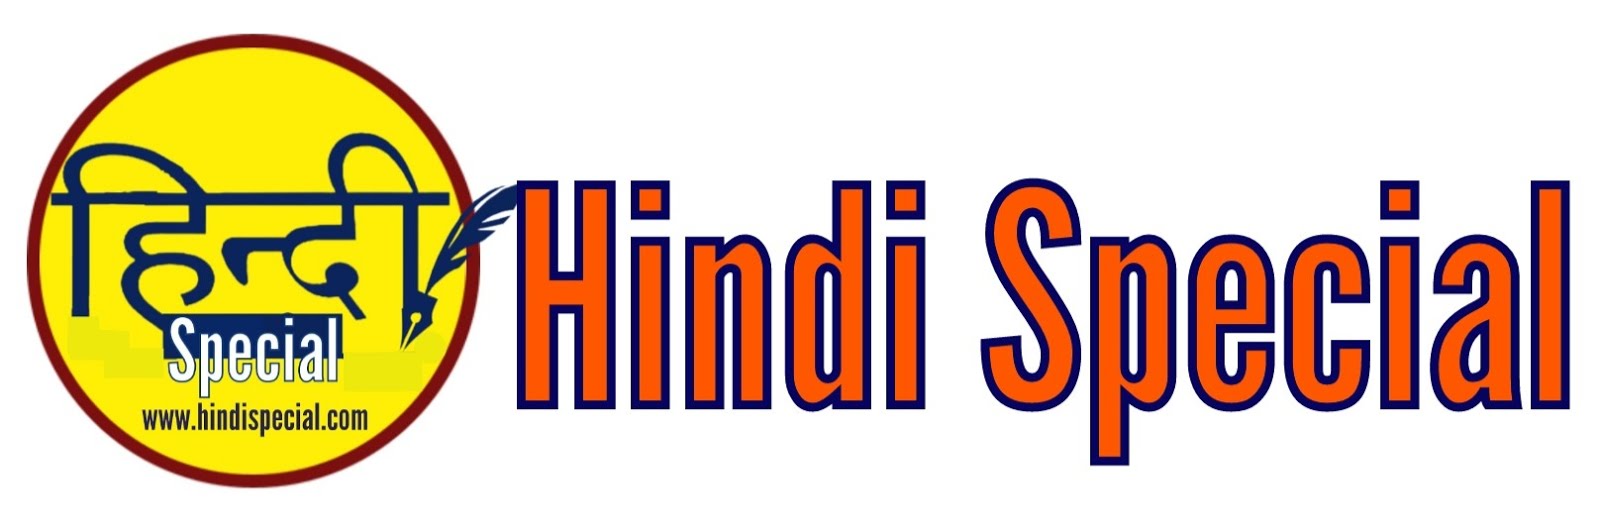 Hindi Special - Best Quotes, Poetry, Stories, Knowledge, Facts, Latest News etc. in hindi.